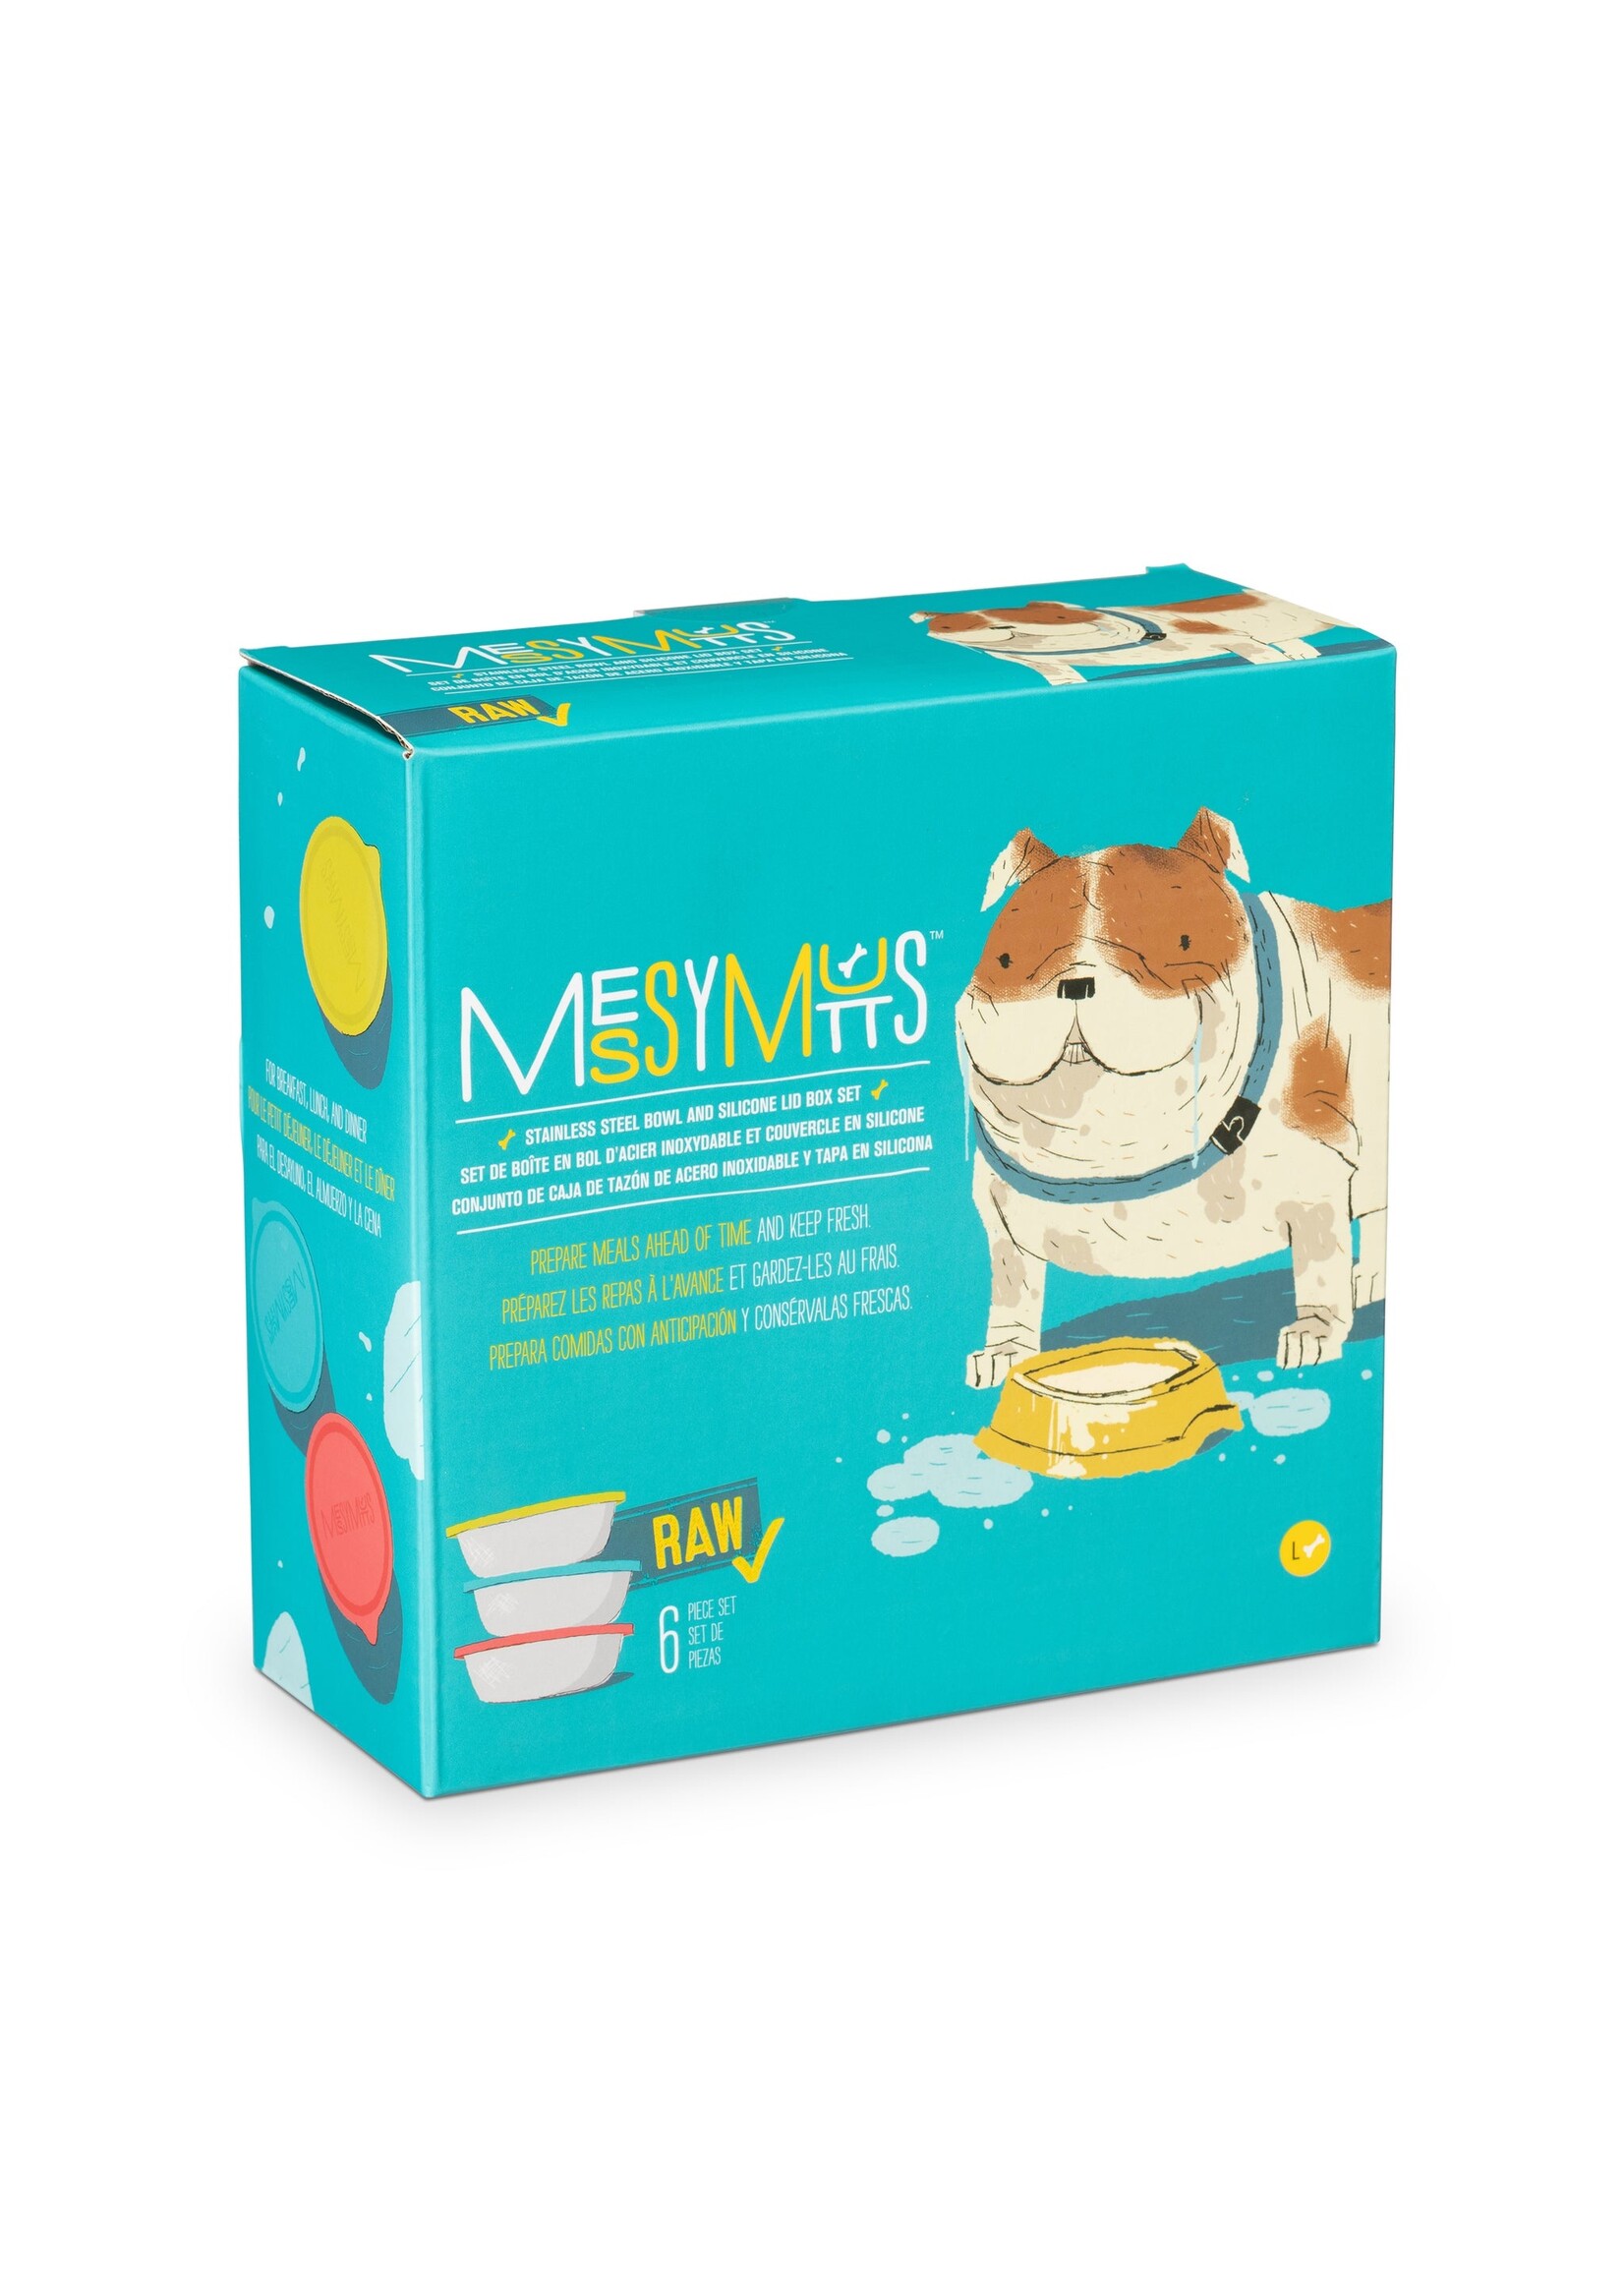 Messy Mutts Messy Mutts 6pc Bowl/Cover Box Set